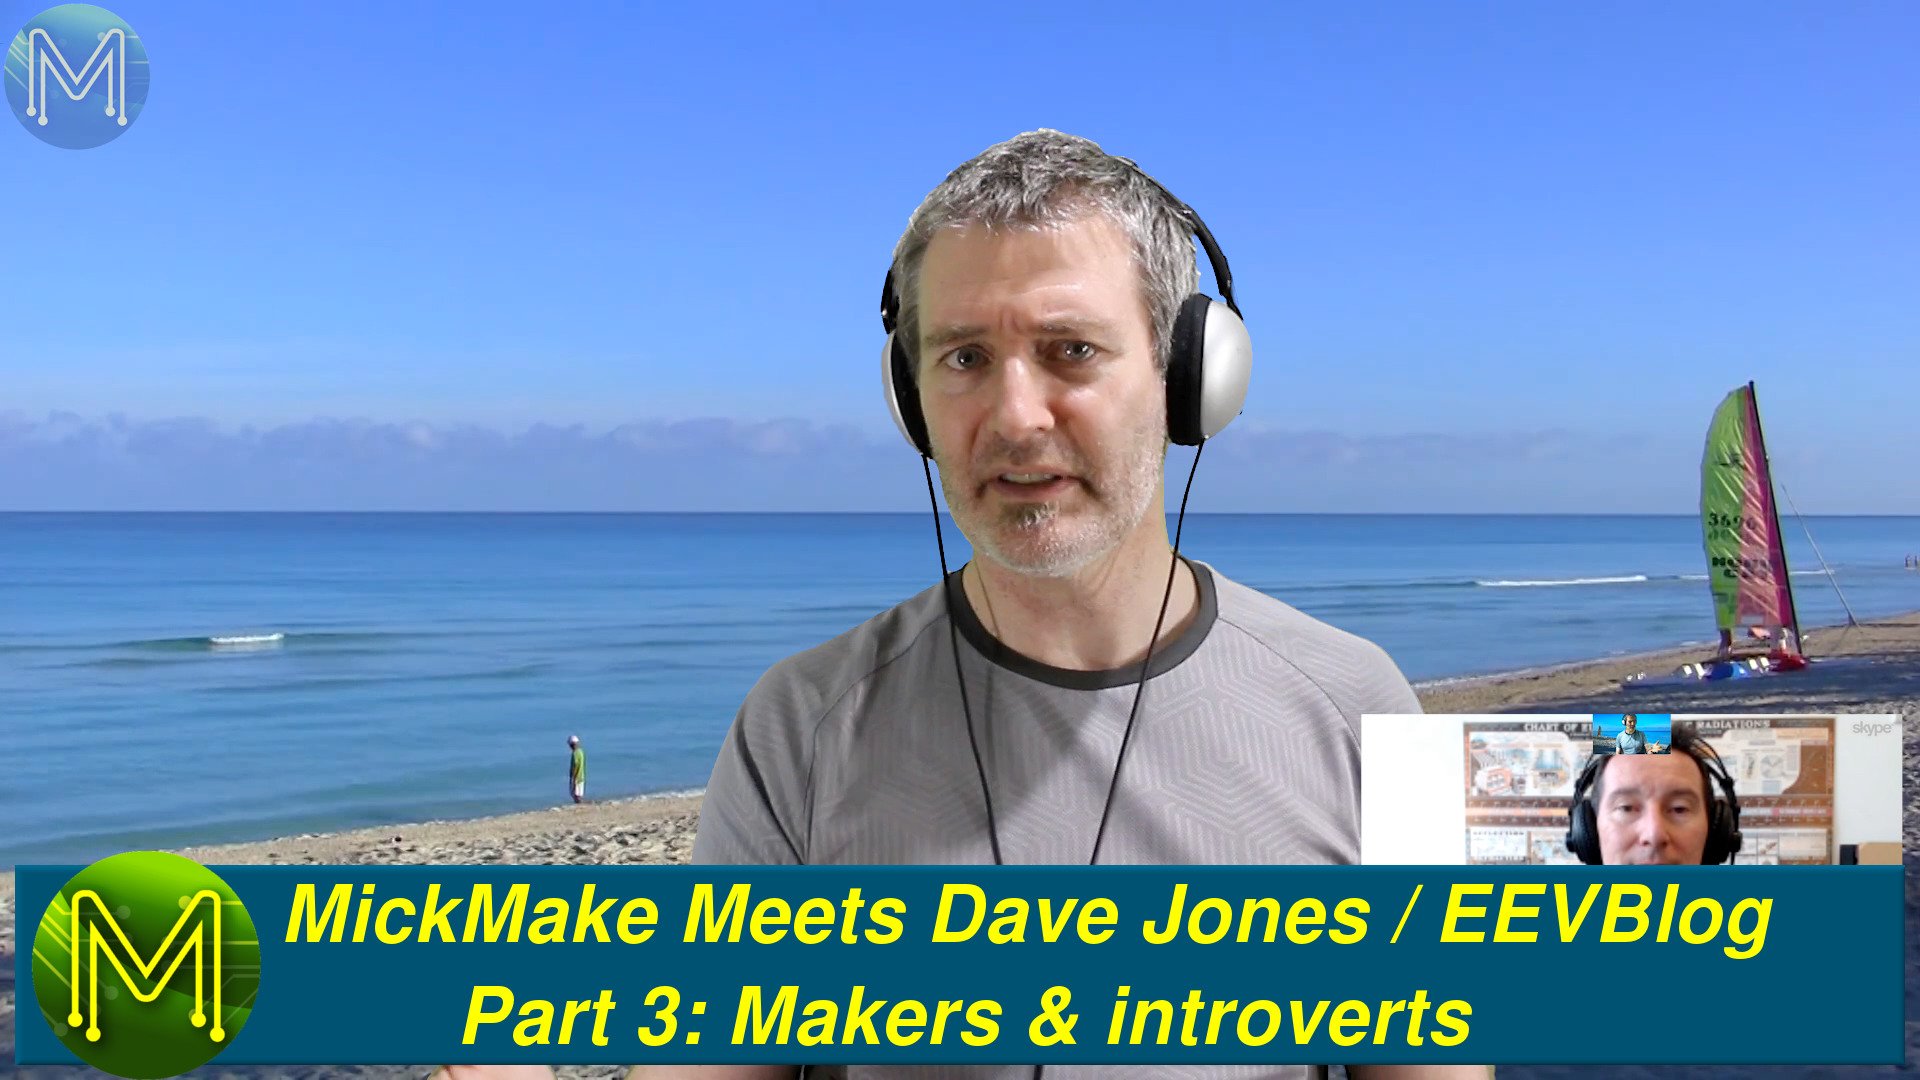 Part 3: Makers & introverts